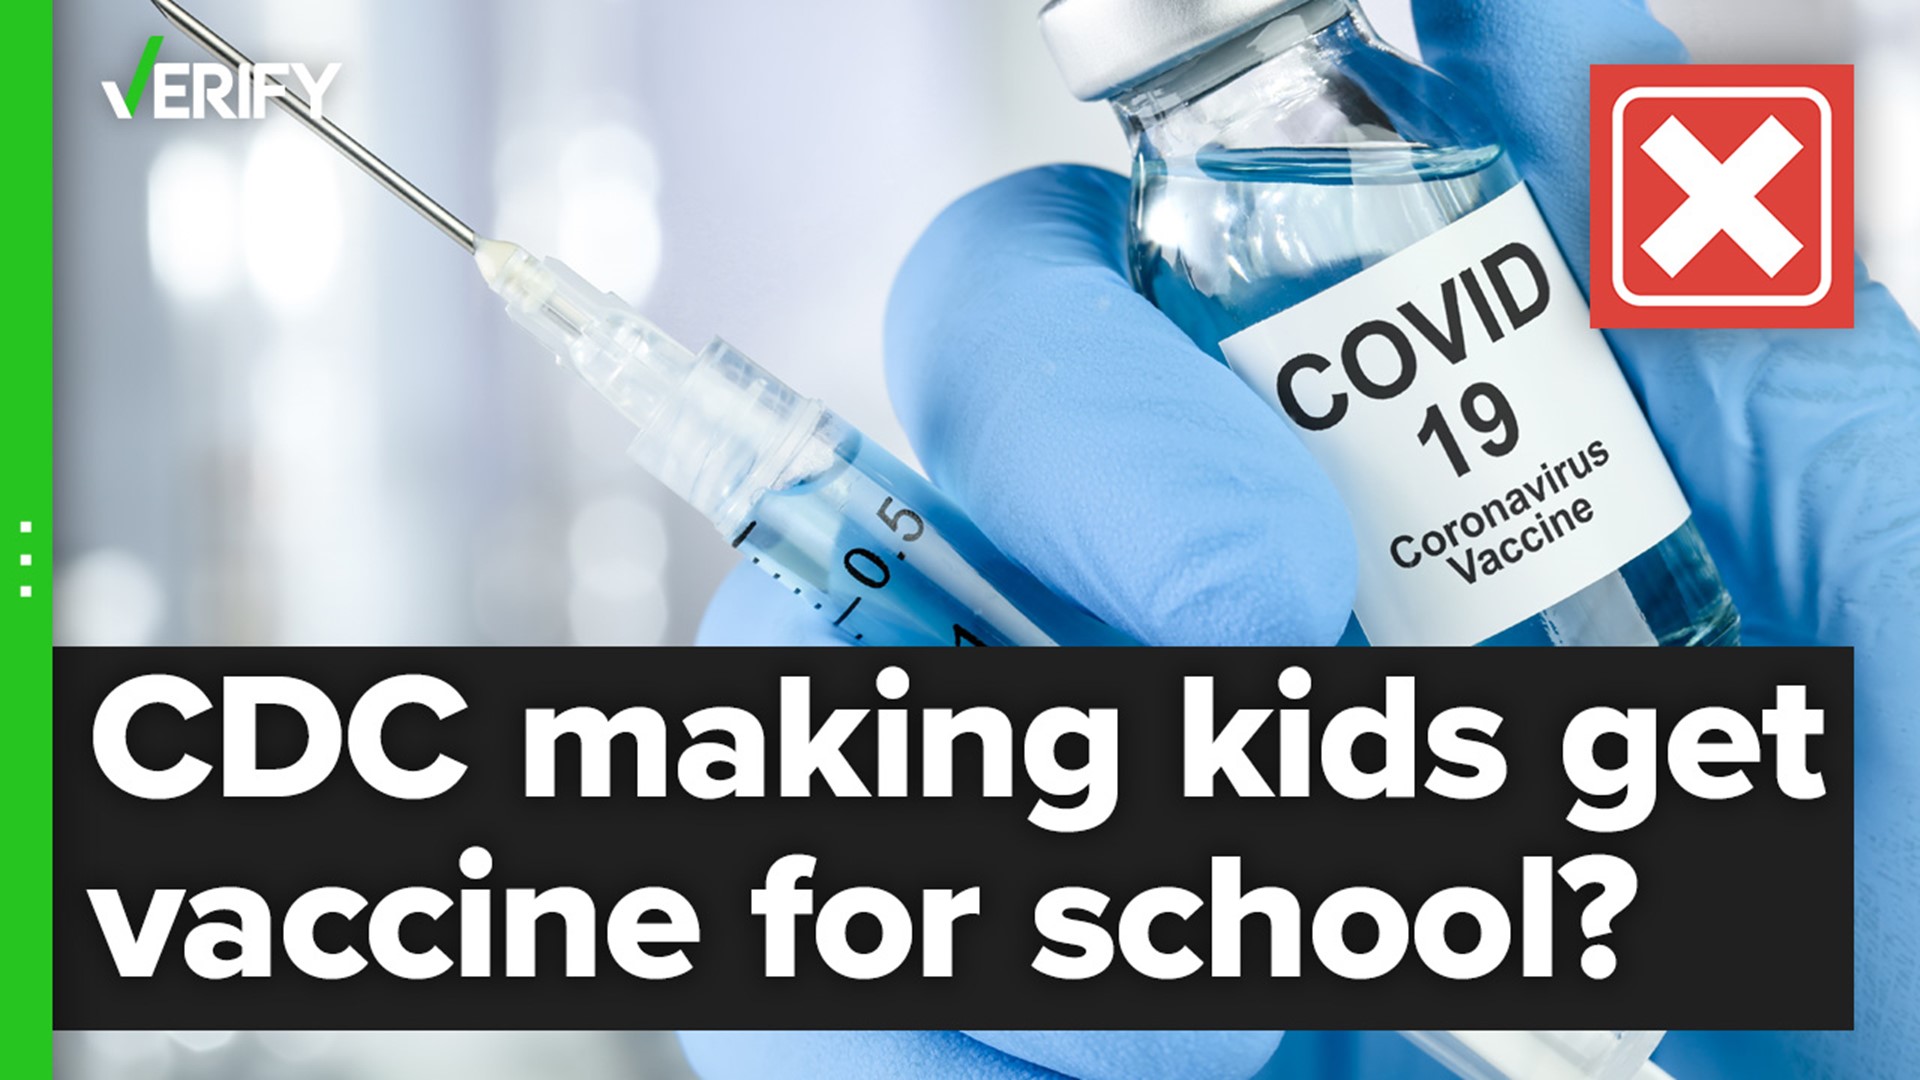 A CDC committee voted to add COVID-19 vaccines to a list of recommended immunizations, but it can’t require that all kids get them to go to school.